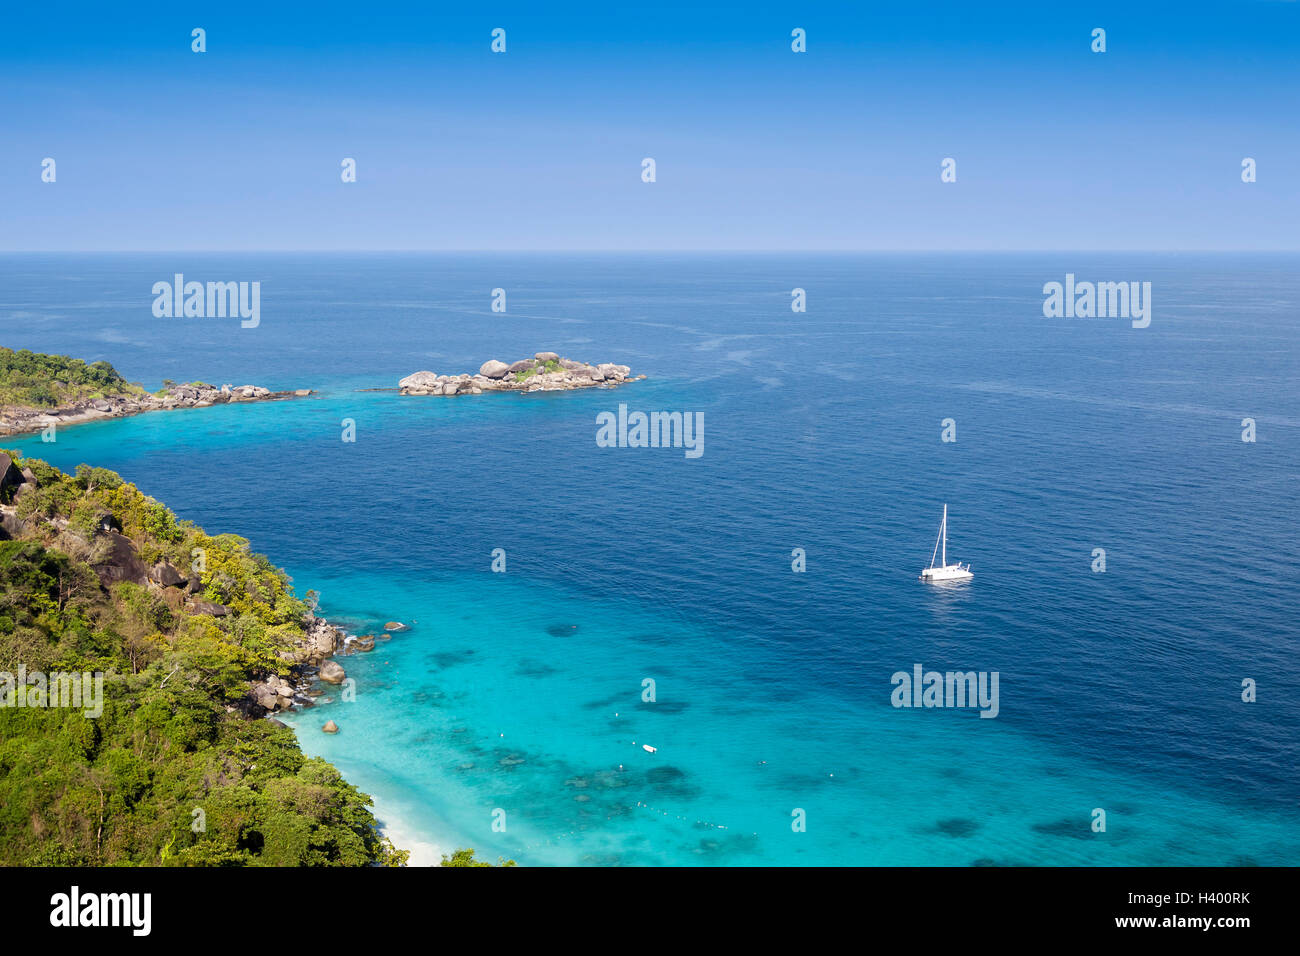 Tropical island surrounded by transparent turquoise water and coral reefs Stock Photo